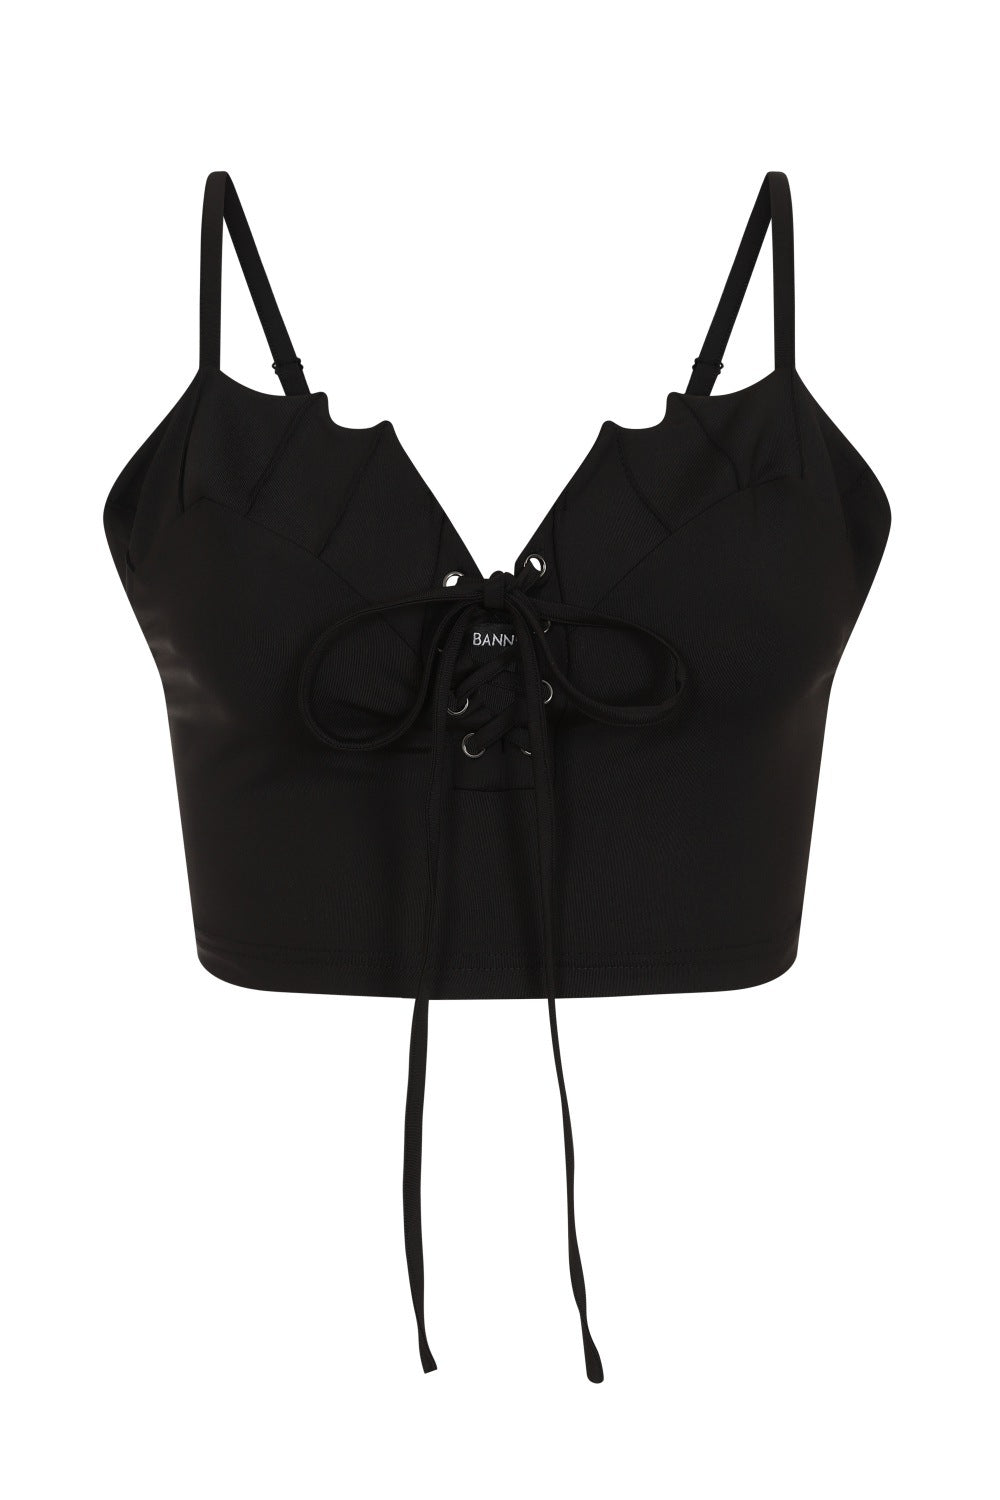 Black crop top with bat wing styled cups and corset tie up detail